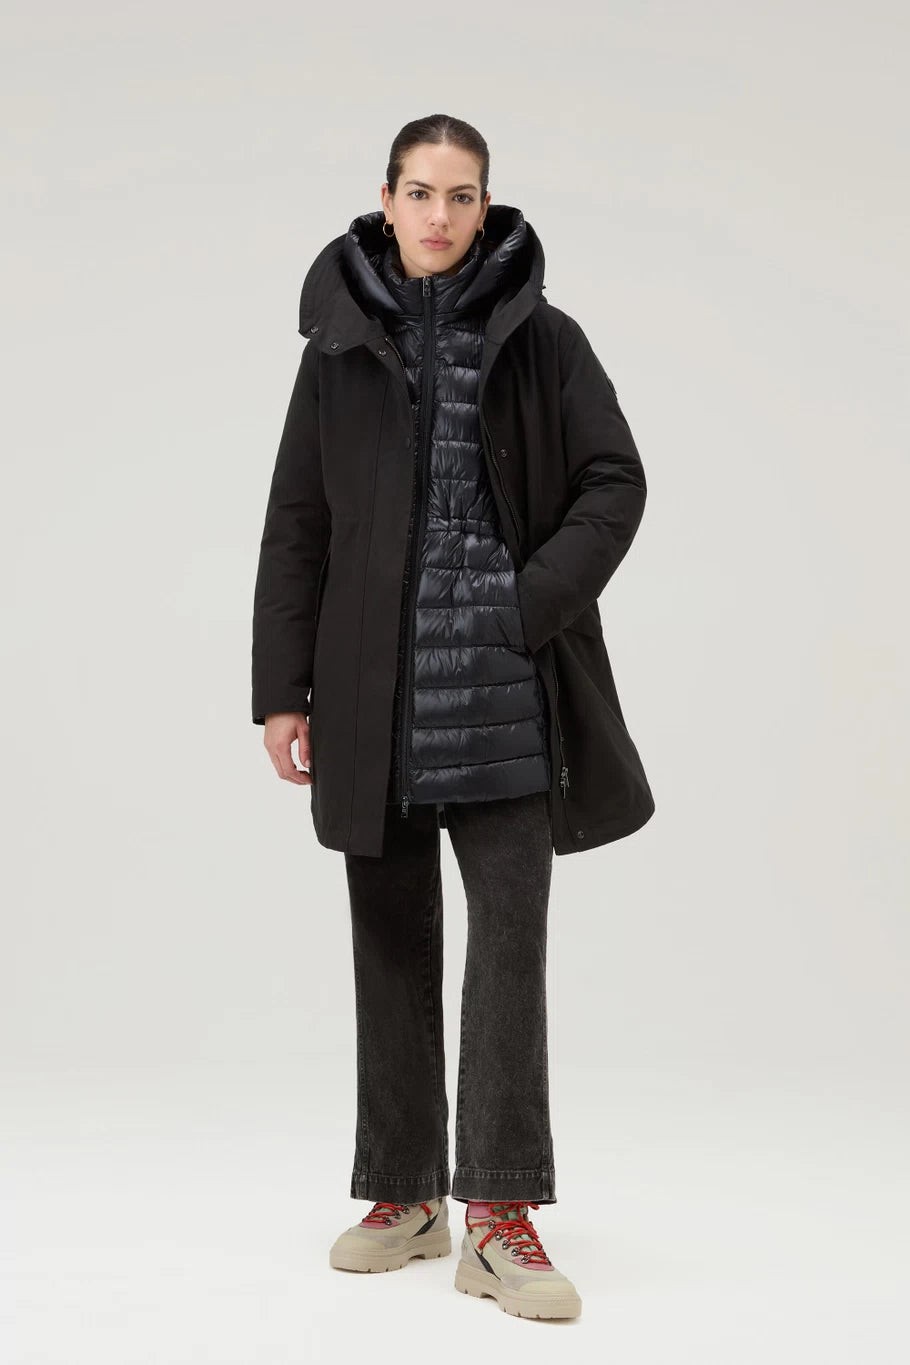 Lona Black 3-in-1 Military Parka in Ramar Cloth with Detachable Quilted Jacket